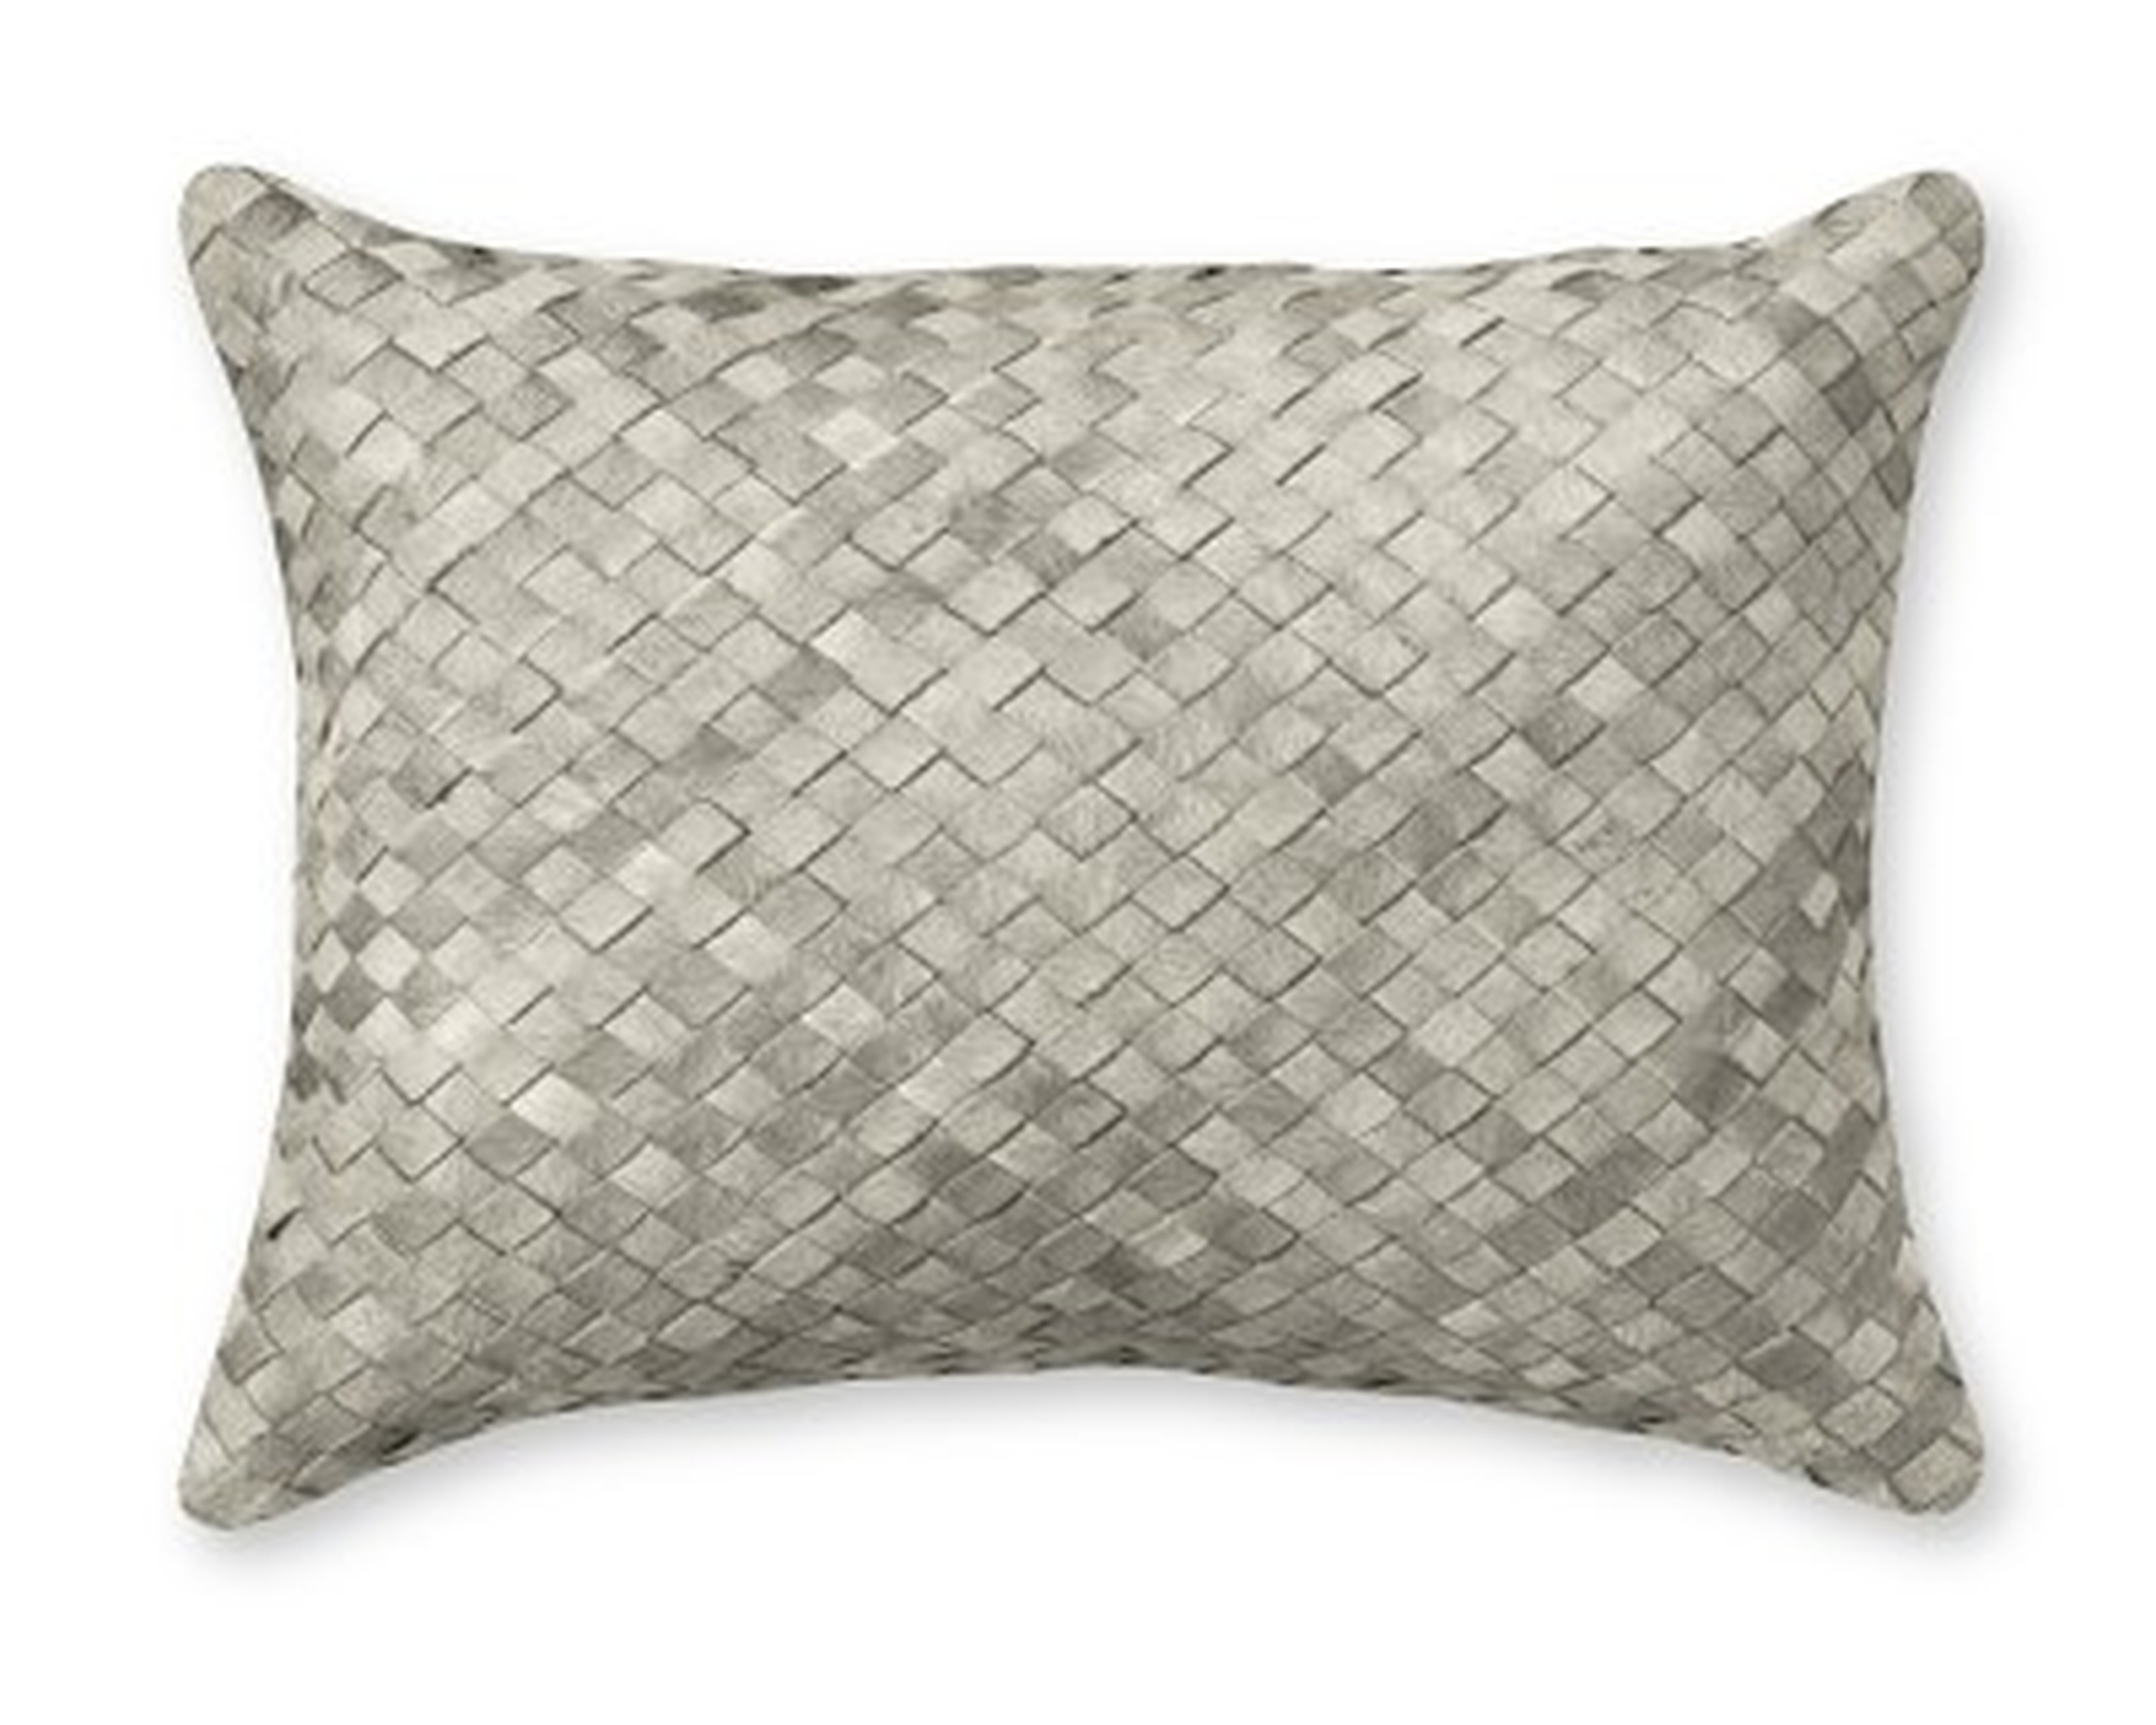 Woven Leather Hide Pillow Cover, 12" X 16", Gray - Williams Sonoma